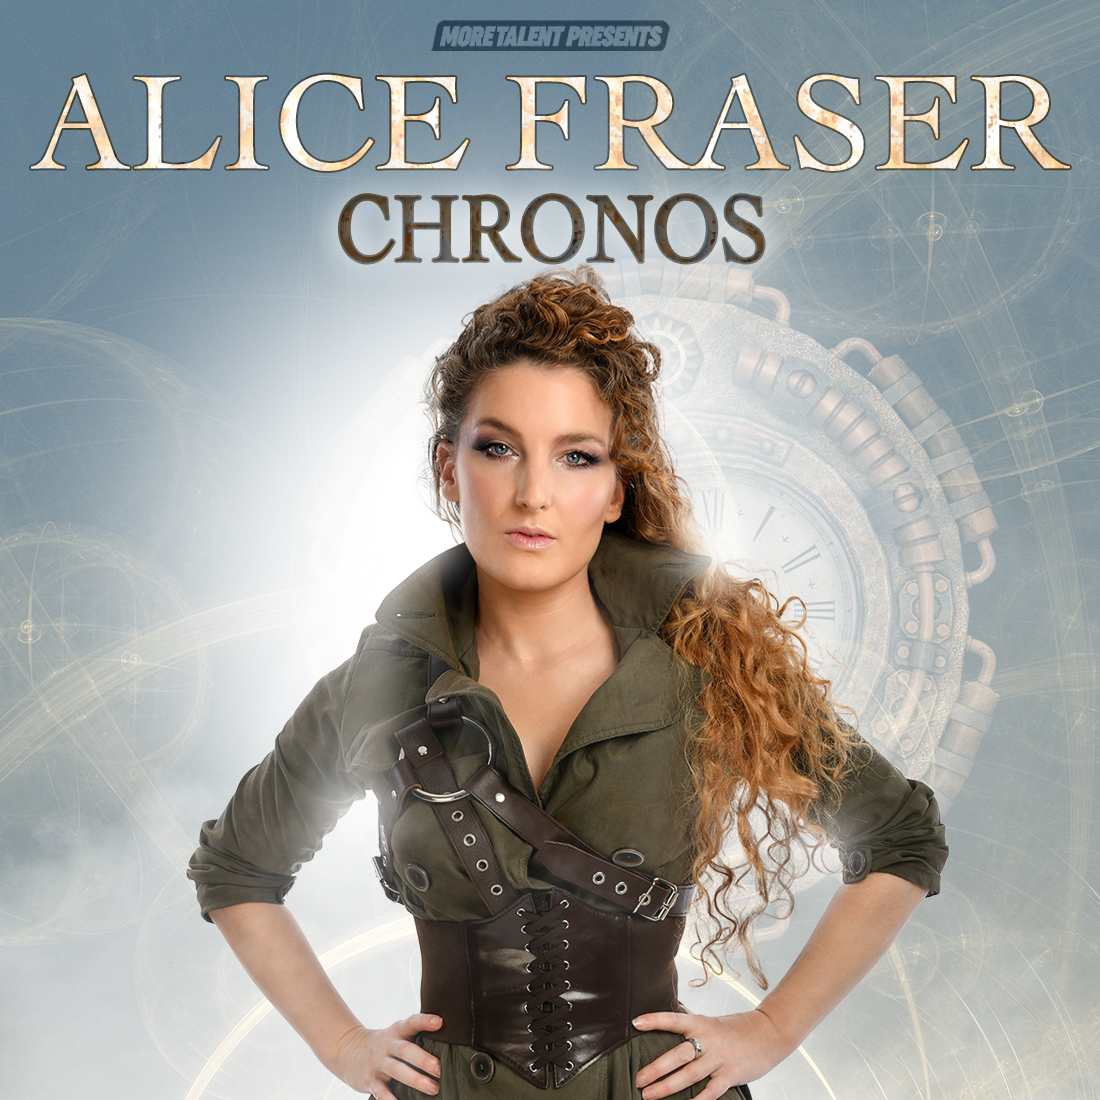 Alice Fraser stands with hands on hips looking into the camera. Alice wears khaki-green with popped collar and brown leather belts and buckles, steam-punk/fantasy style. In the background is light and a faint image of a clock. Written on the image is "ALICE FRASER: CHRONOS" and lots of 5 stars from media quotes.